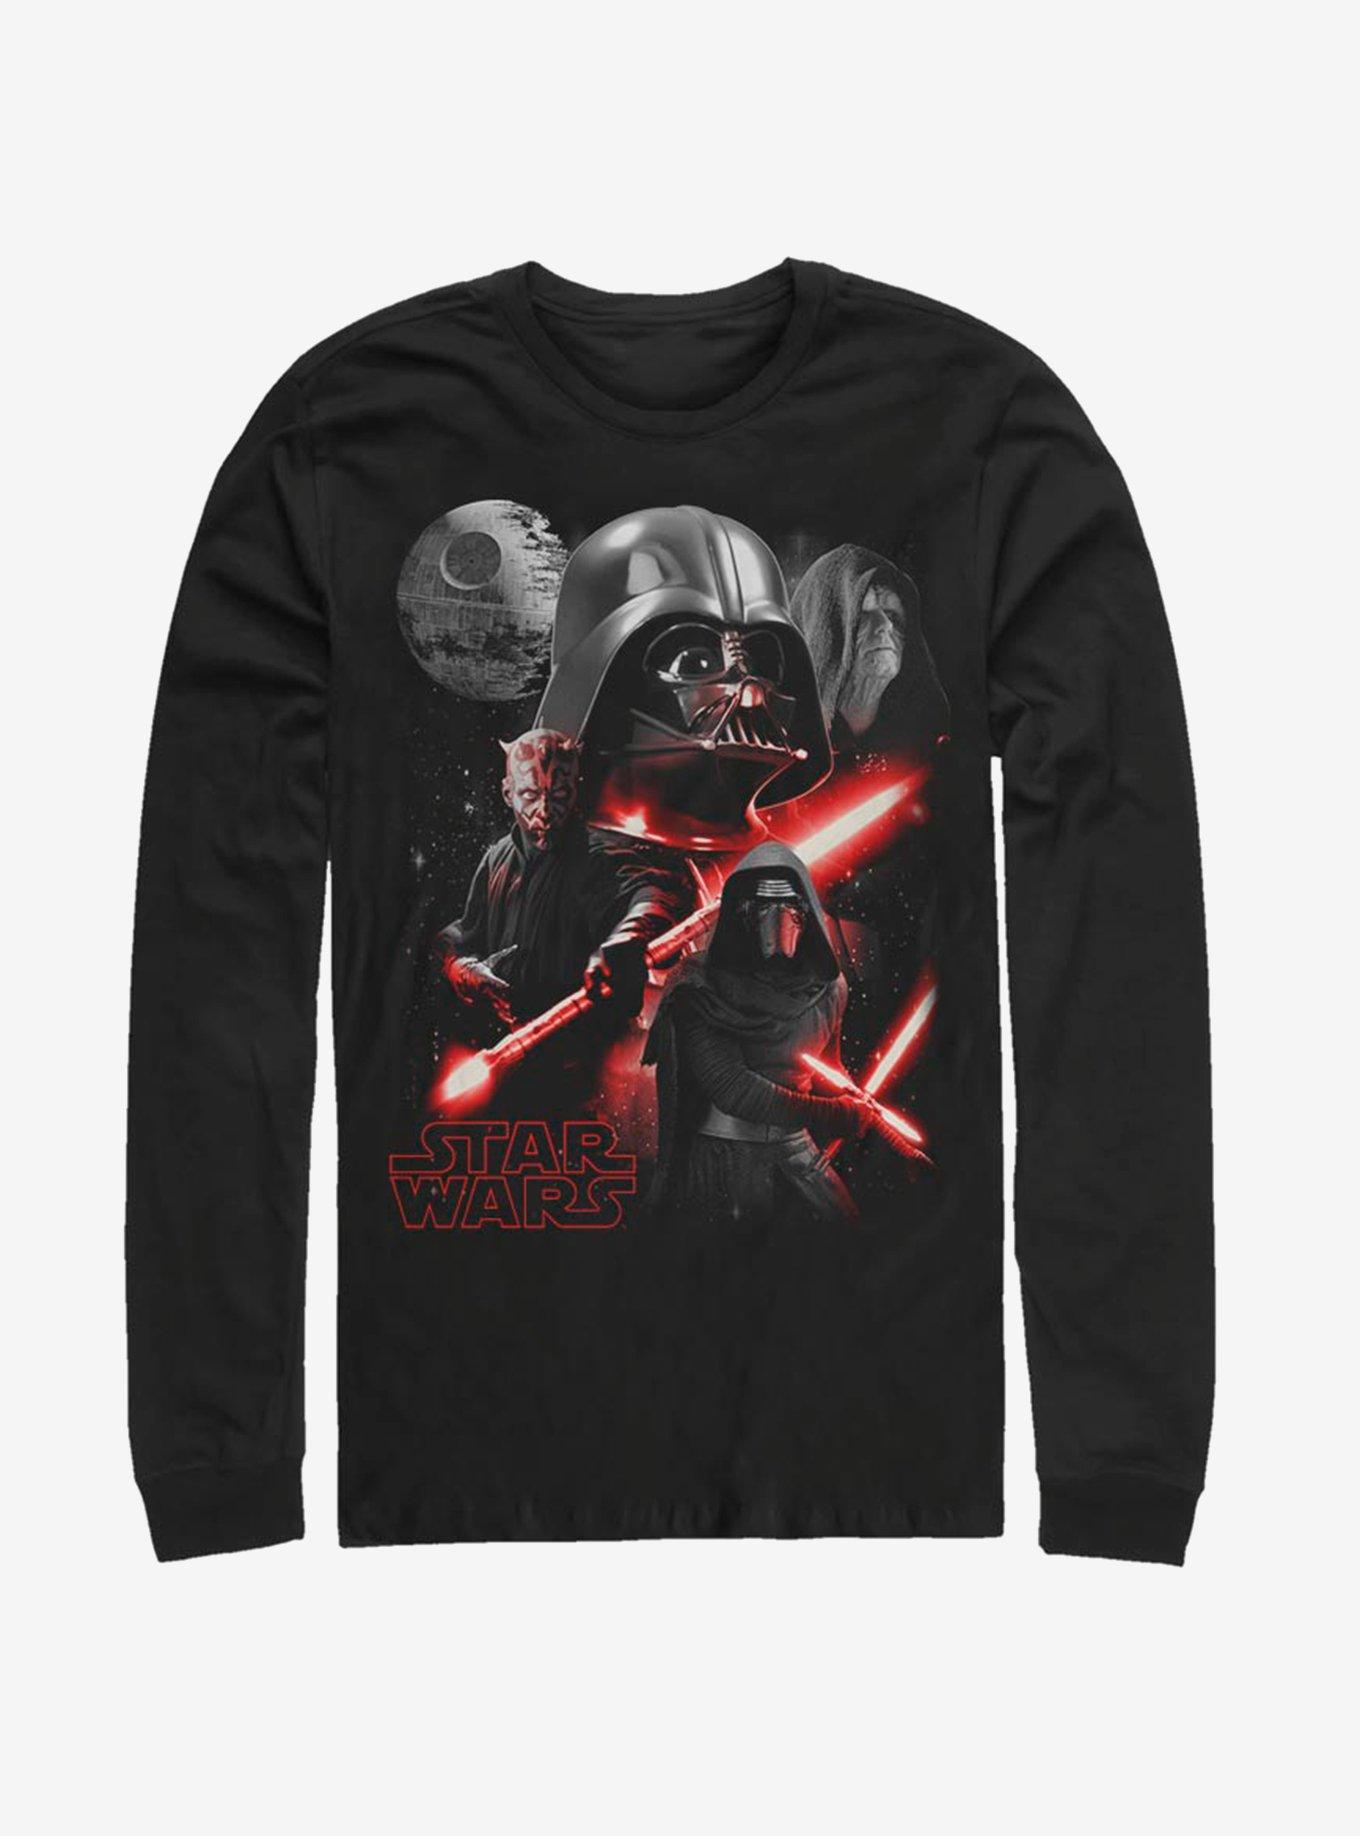 Star Wars Poster Style Long-Sleeve T-Shirt